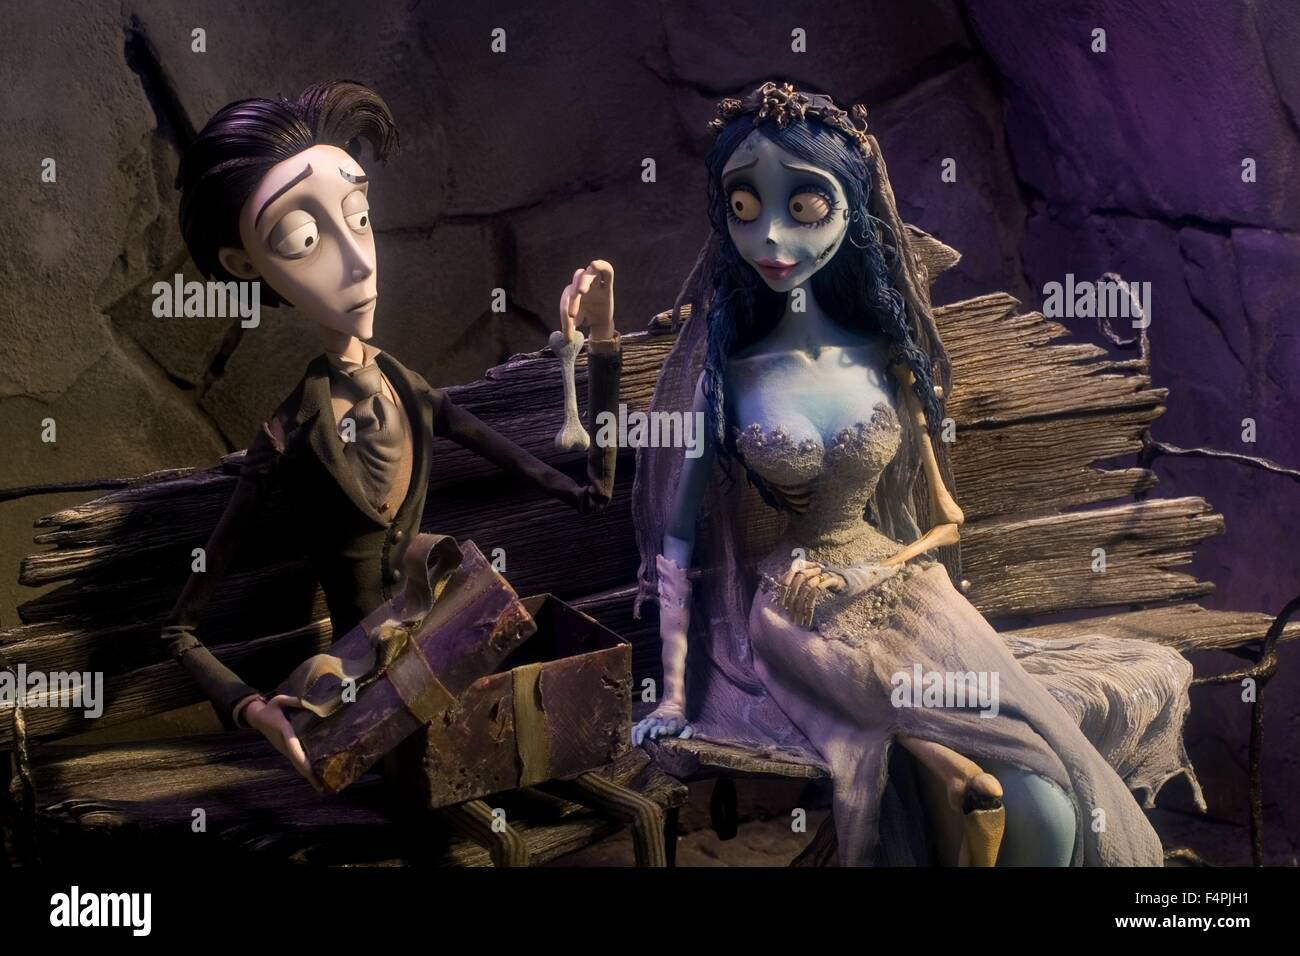 https://c8.alamy.com/comp/F4PJH1/victor-van-dort-voiced-by-johnny-depp-and-the-corpse-bride-voiced-F4PJH1.jpg